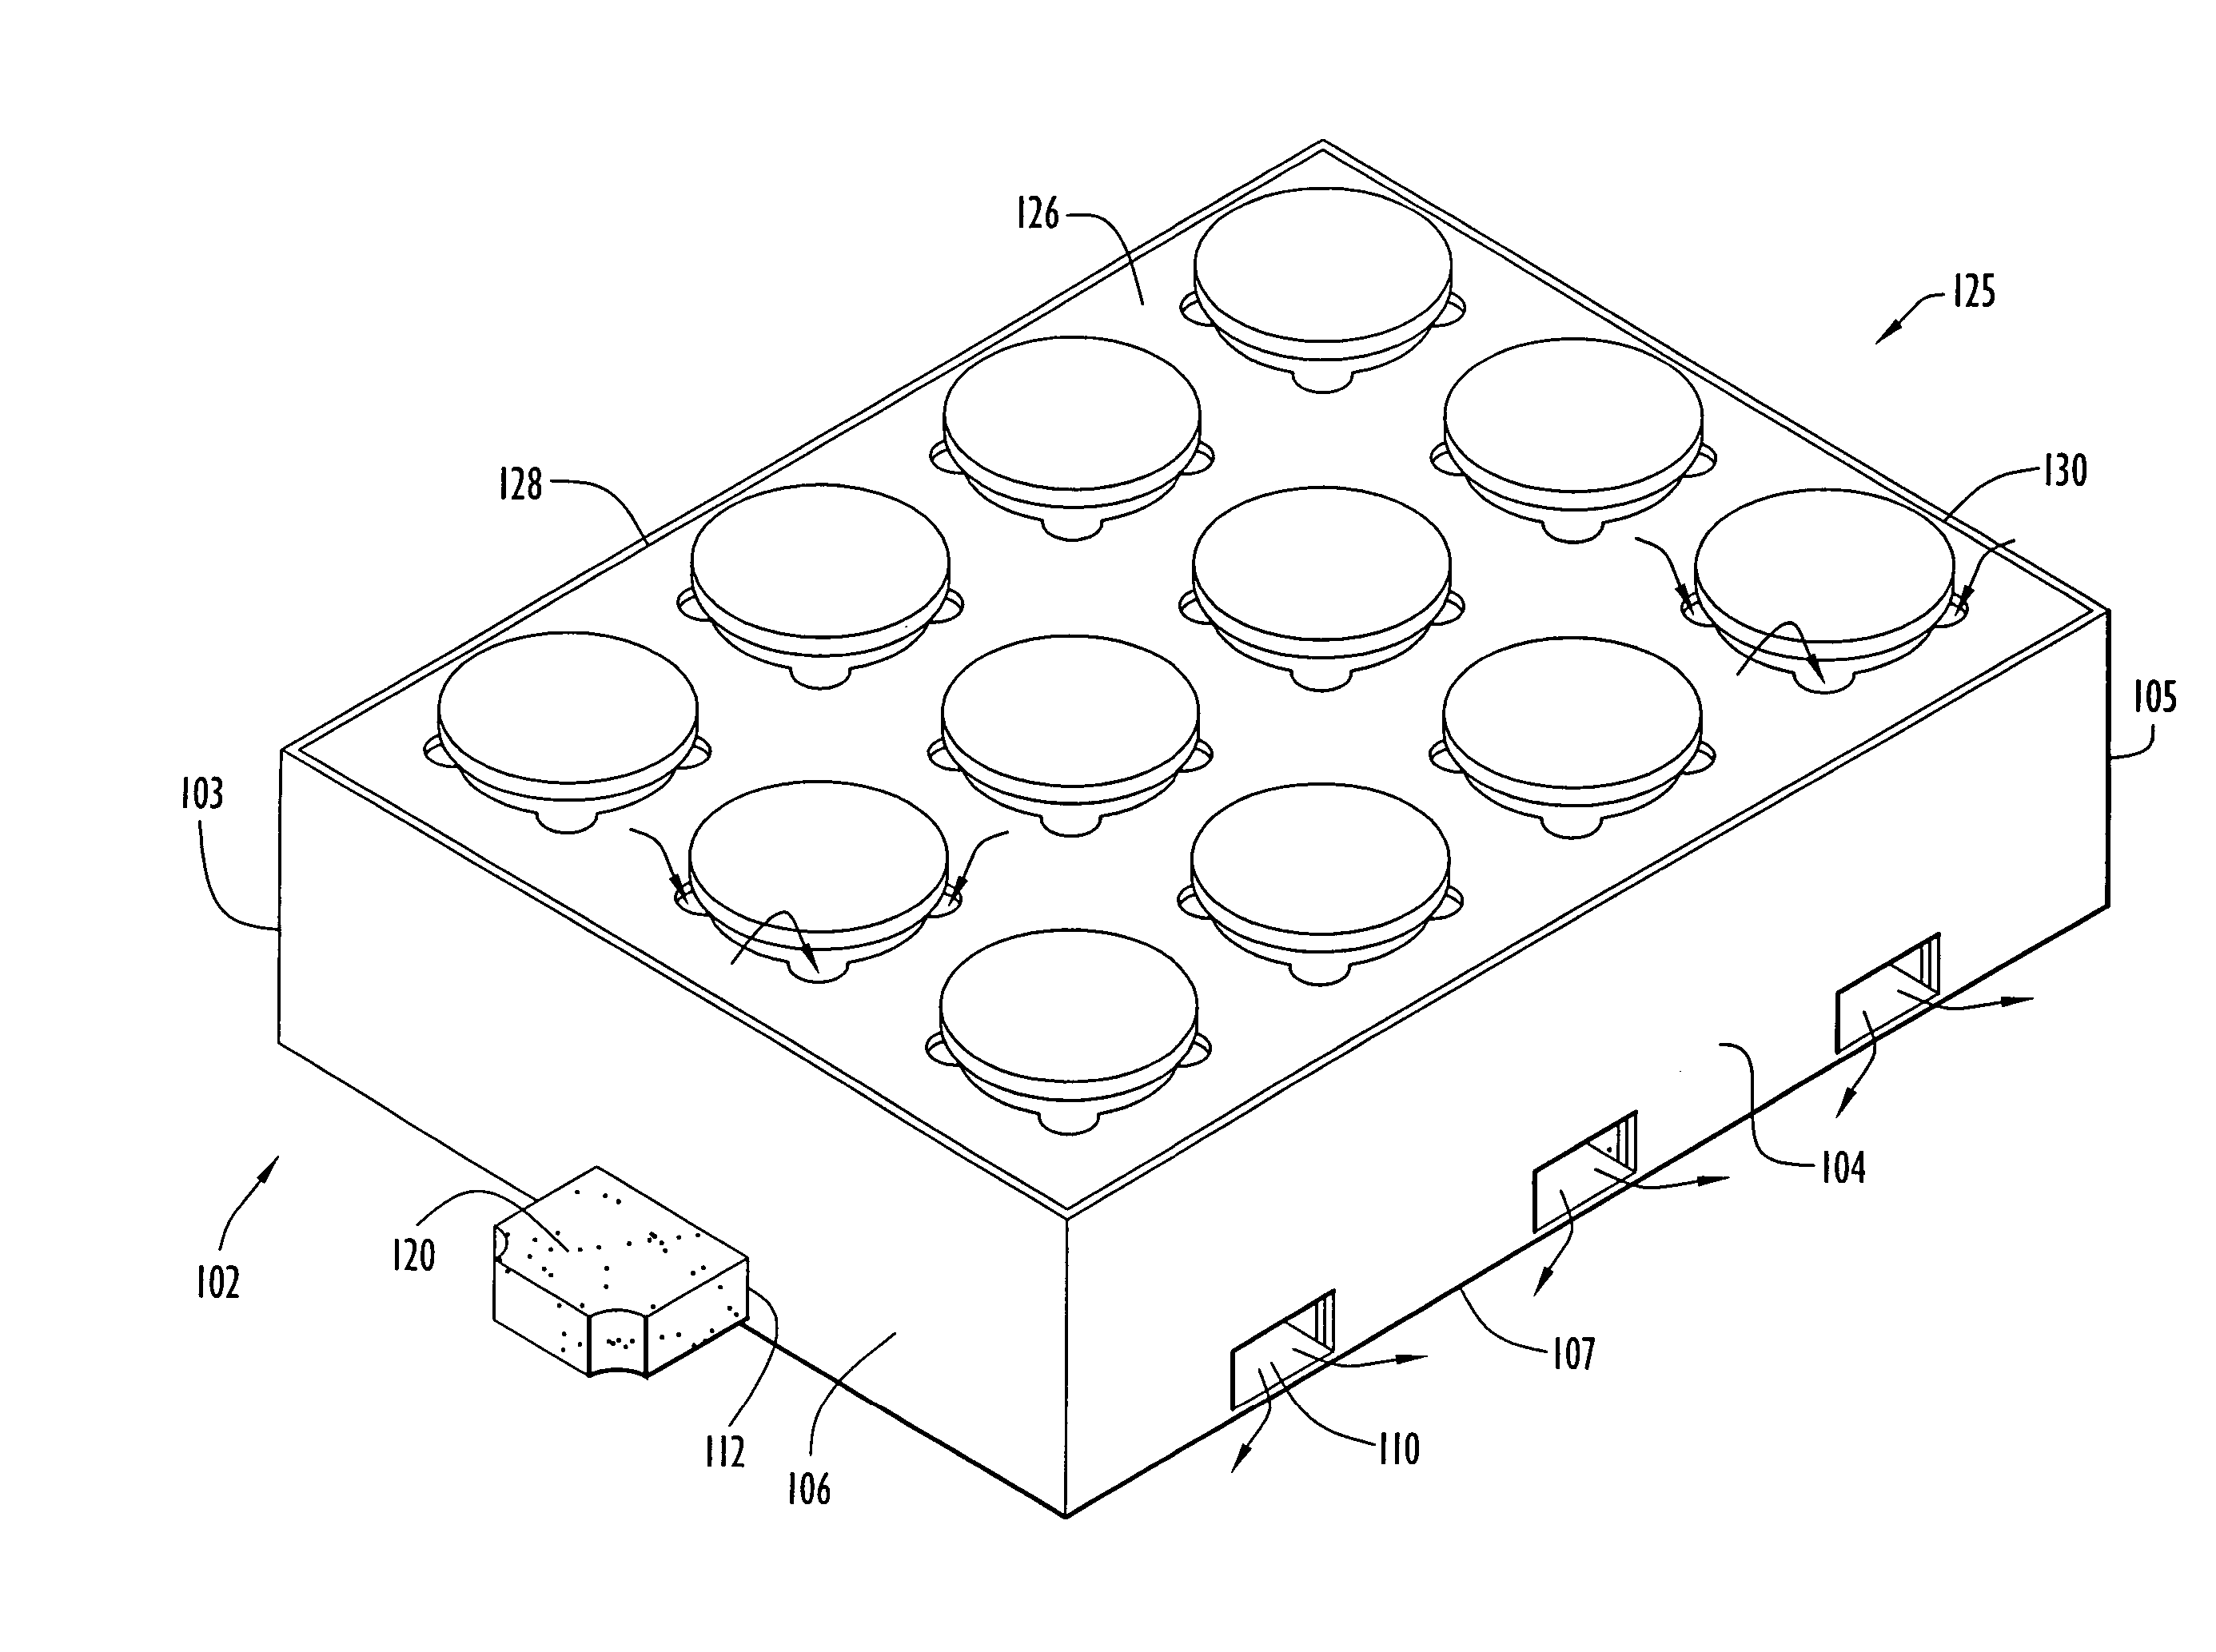 Portable thermal treatment and storage units for containing readily accessible food or beverage items and methods for thermally treating food or beverage items